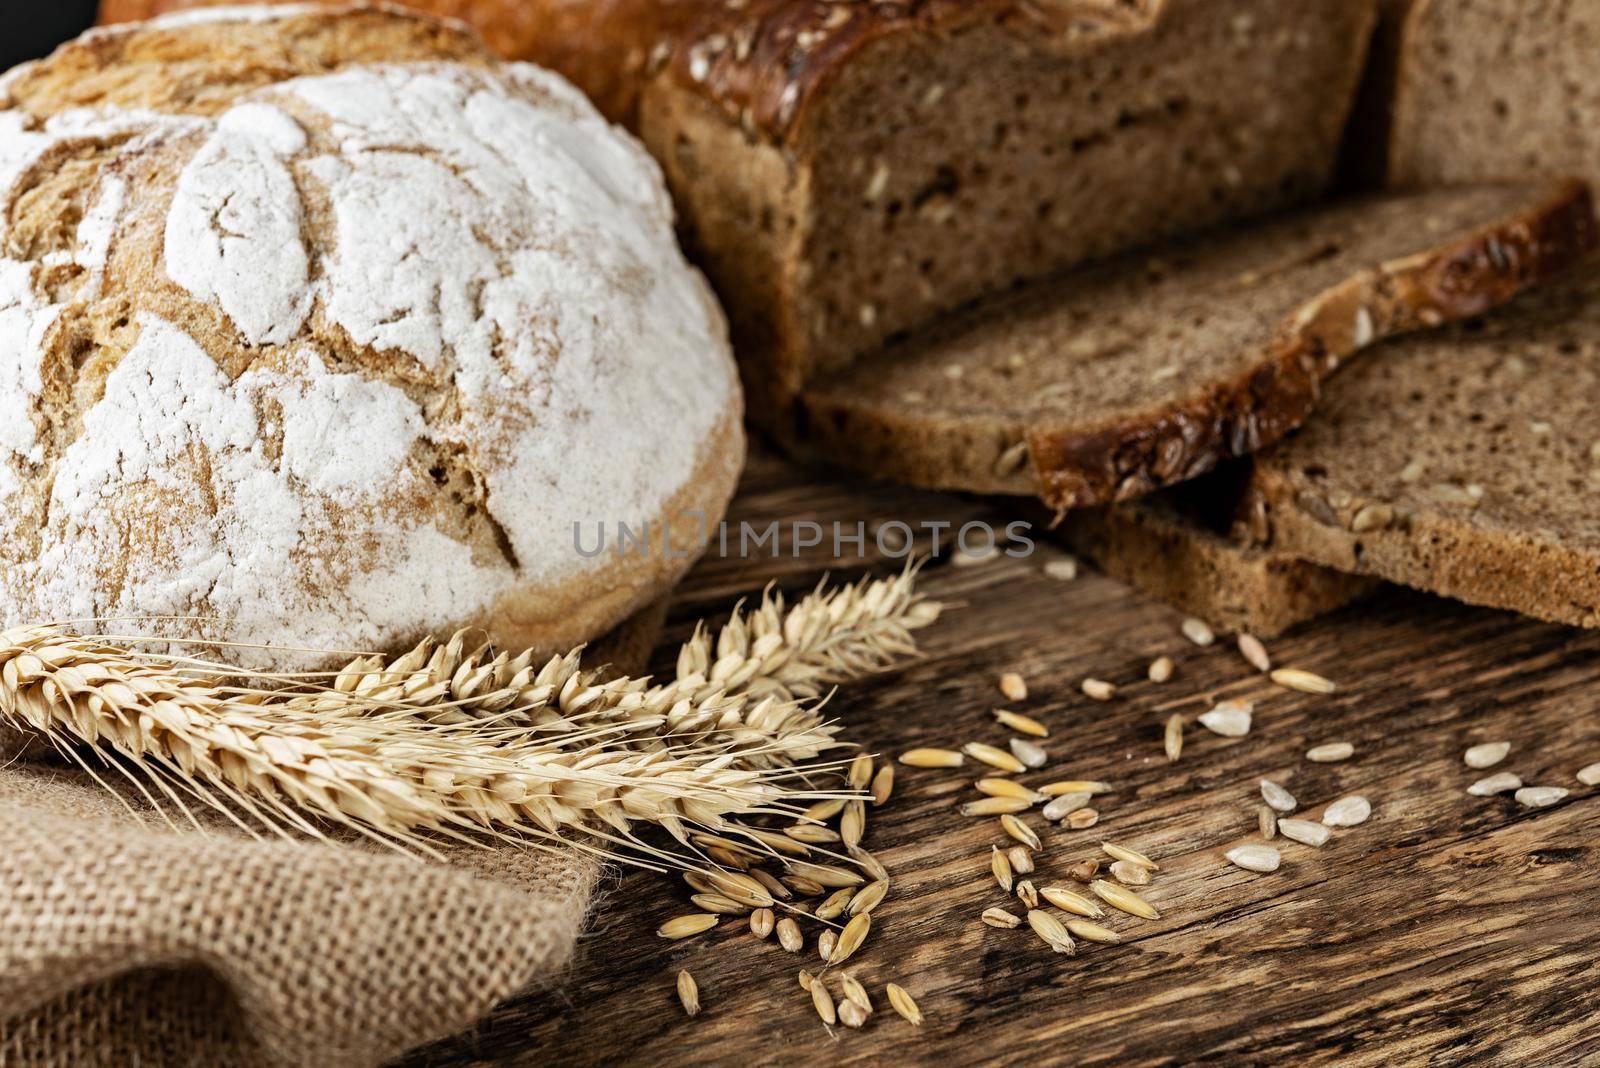 Group of dark breads with wheat, sunflower and rye grains on a wooden vintage table.